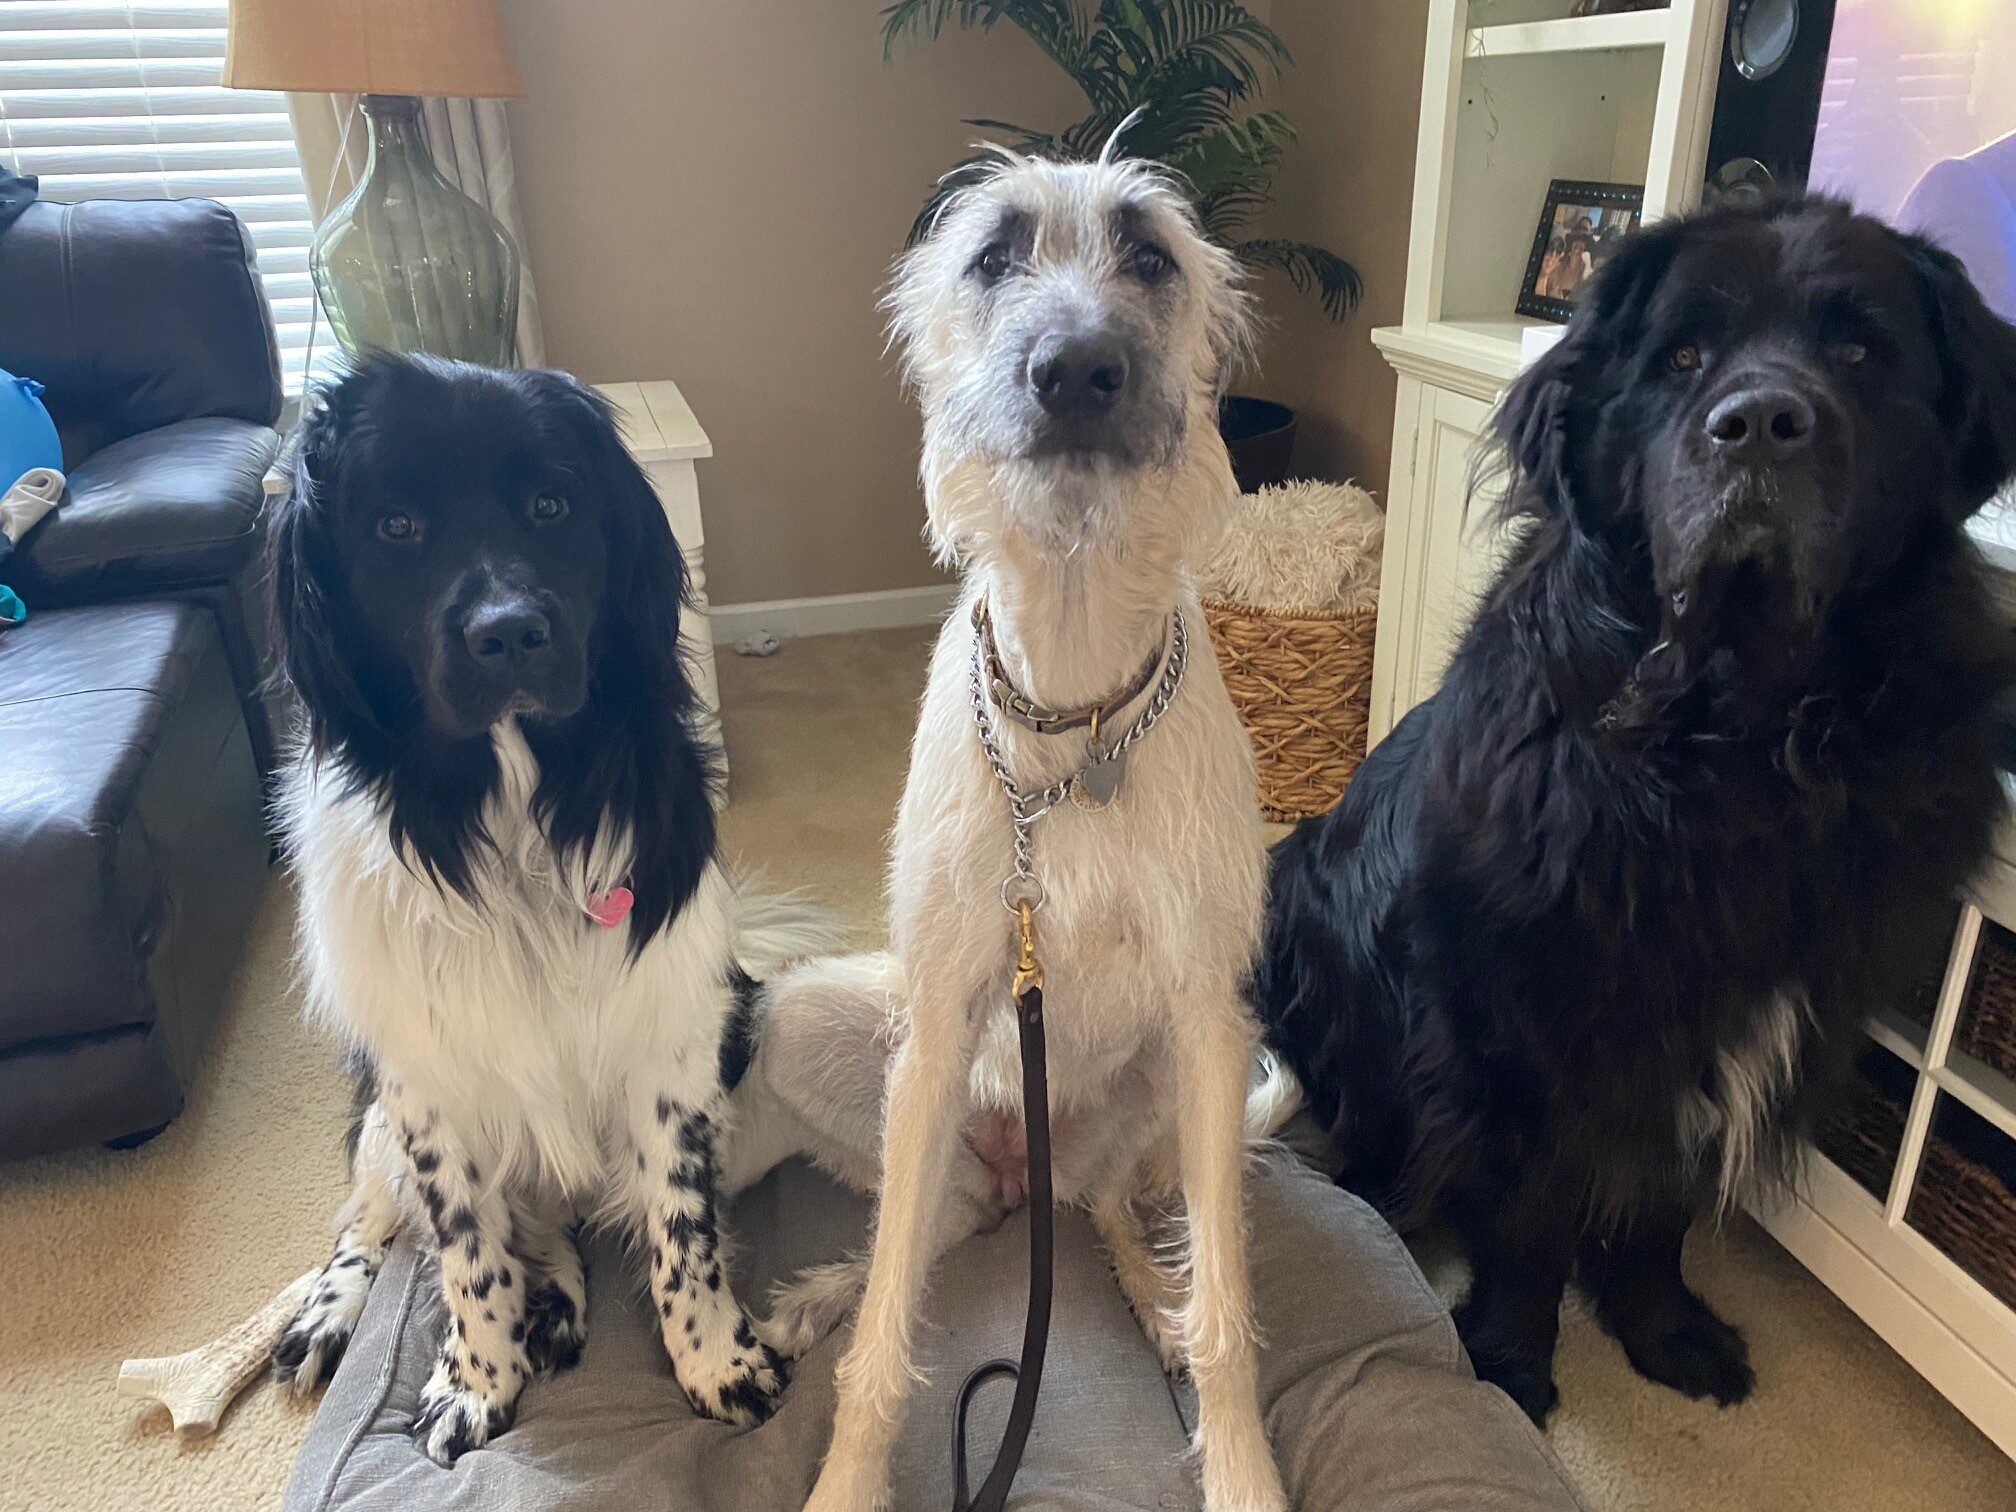 an Irish Wolfhound with two Newfoundland dogs